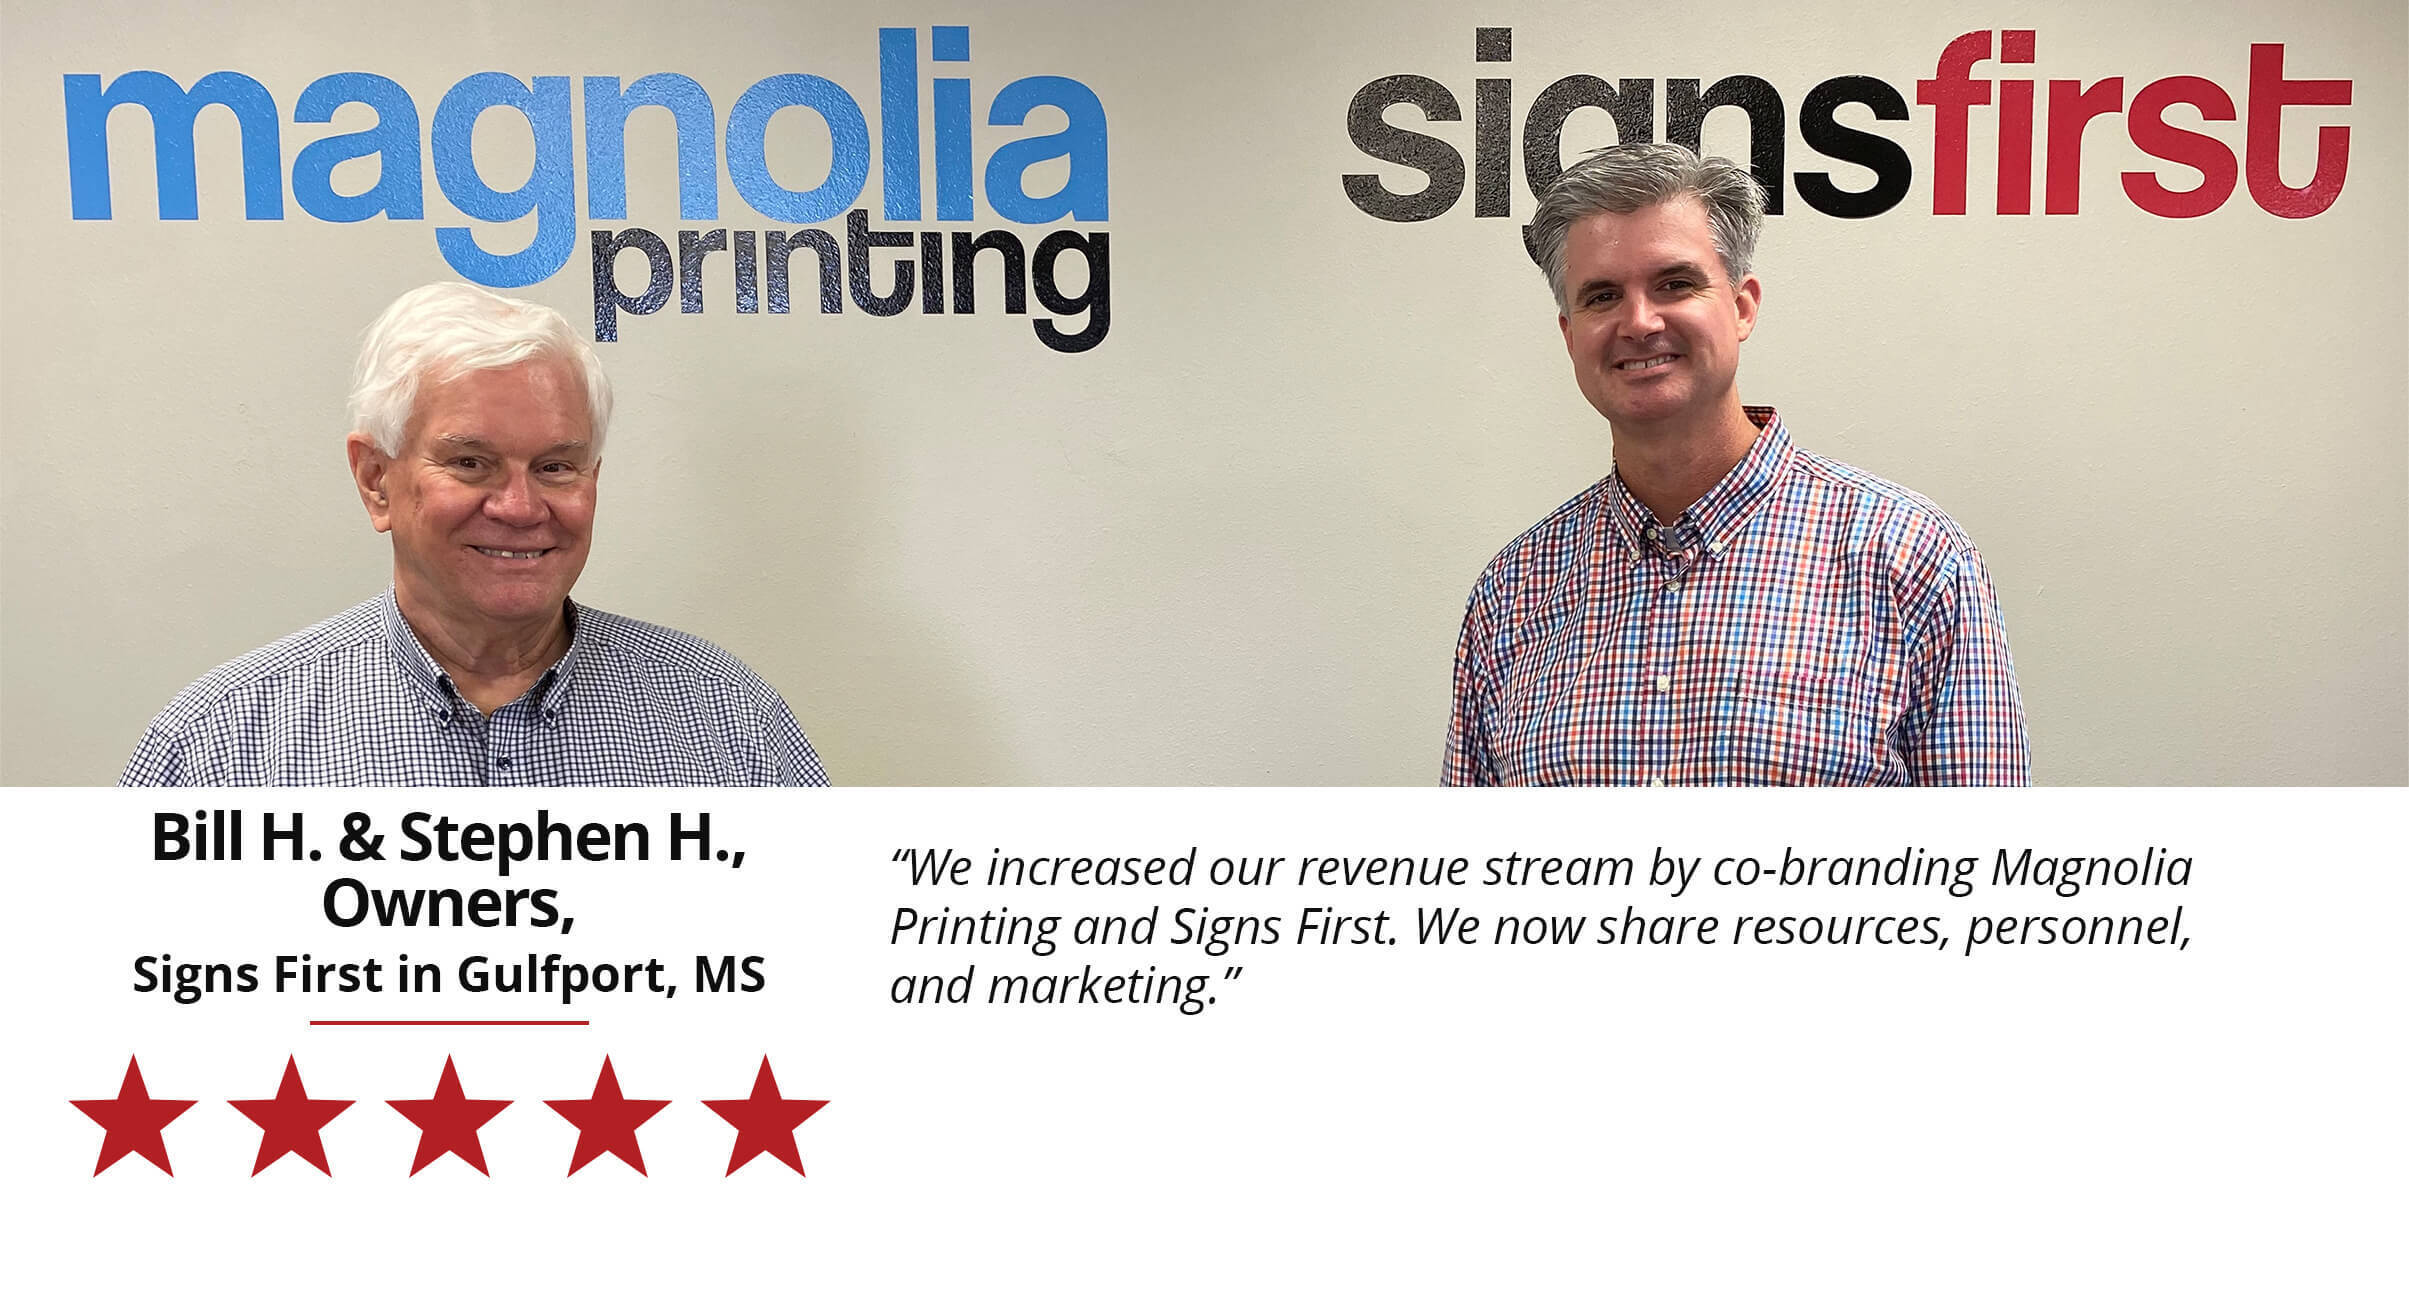 We increased our revenue stream by co-branding Magnolia Printing and Signs First. We now share resources, personnel, and marketing. Bill H. and Stephen H. Owners of Signs First in Gulfport, MS.